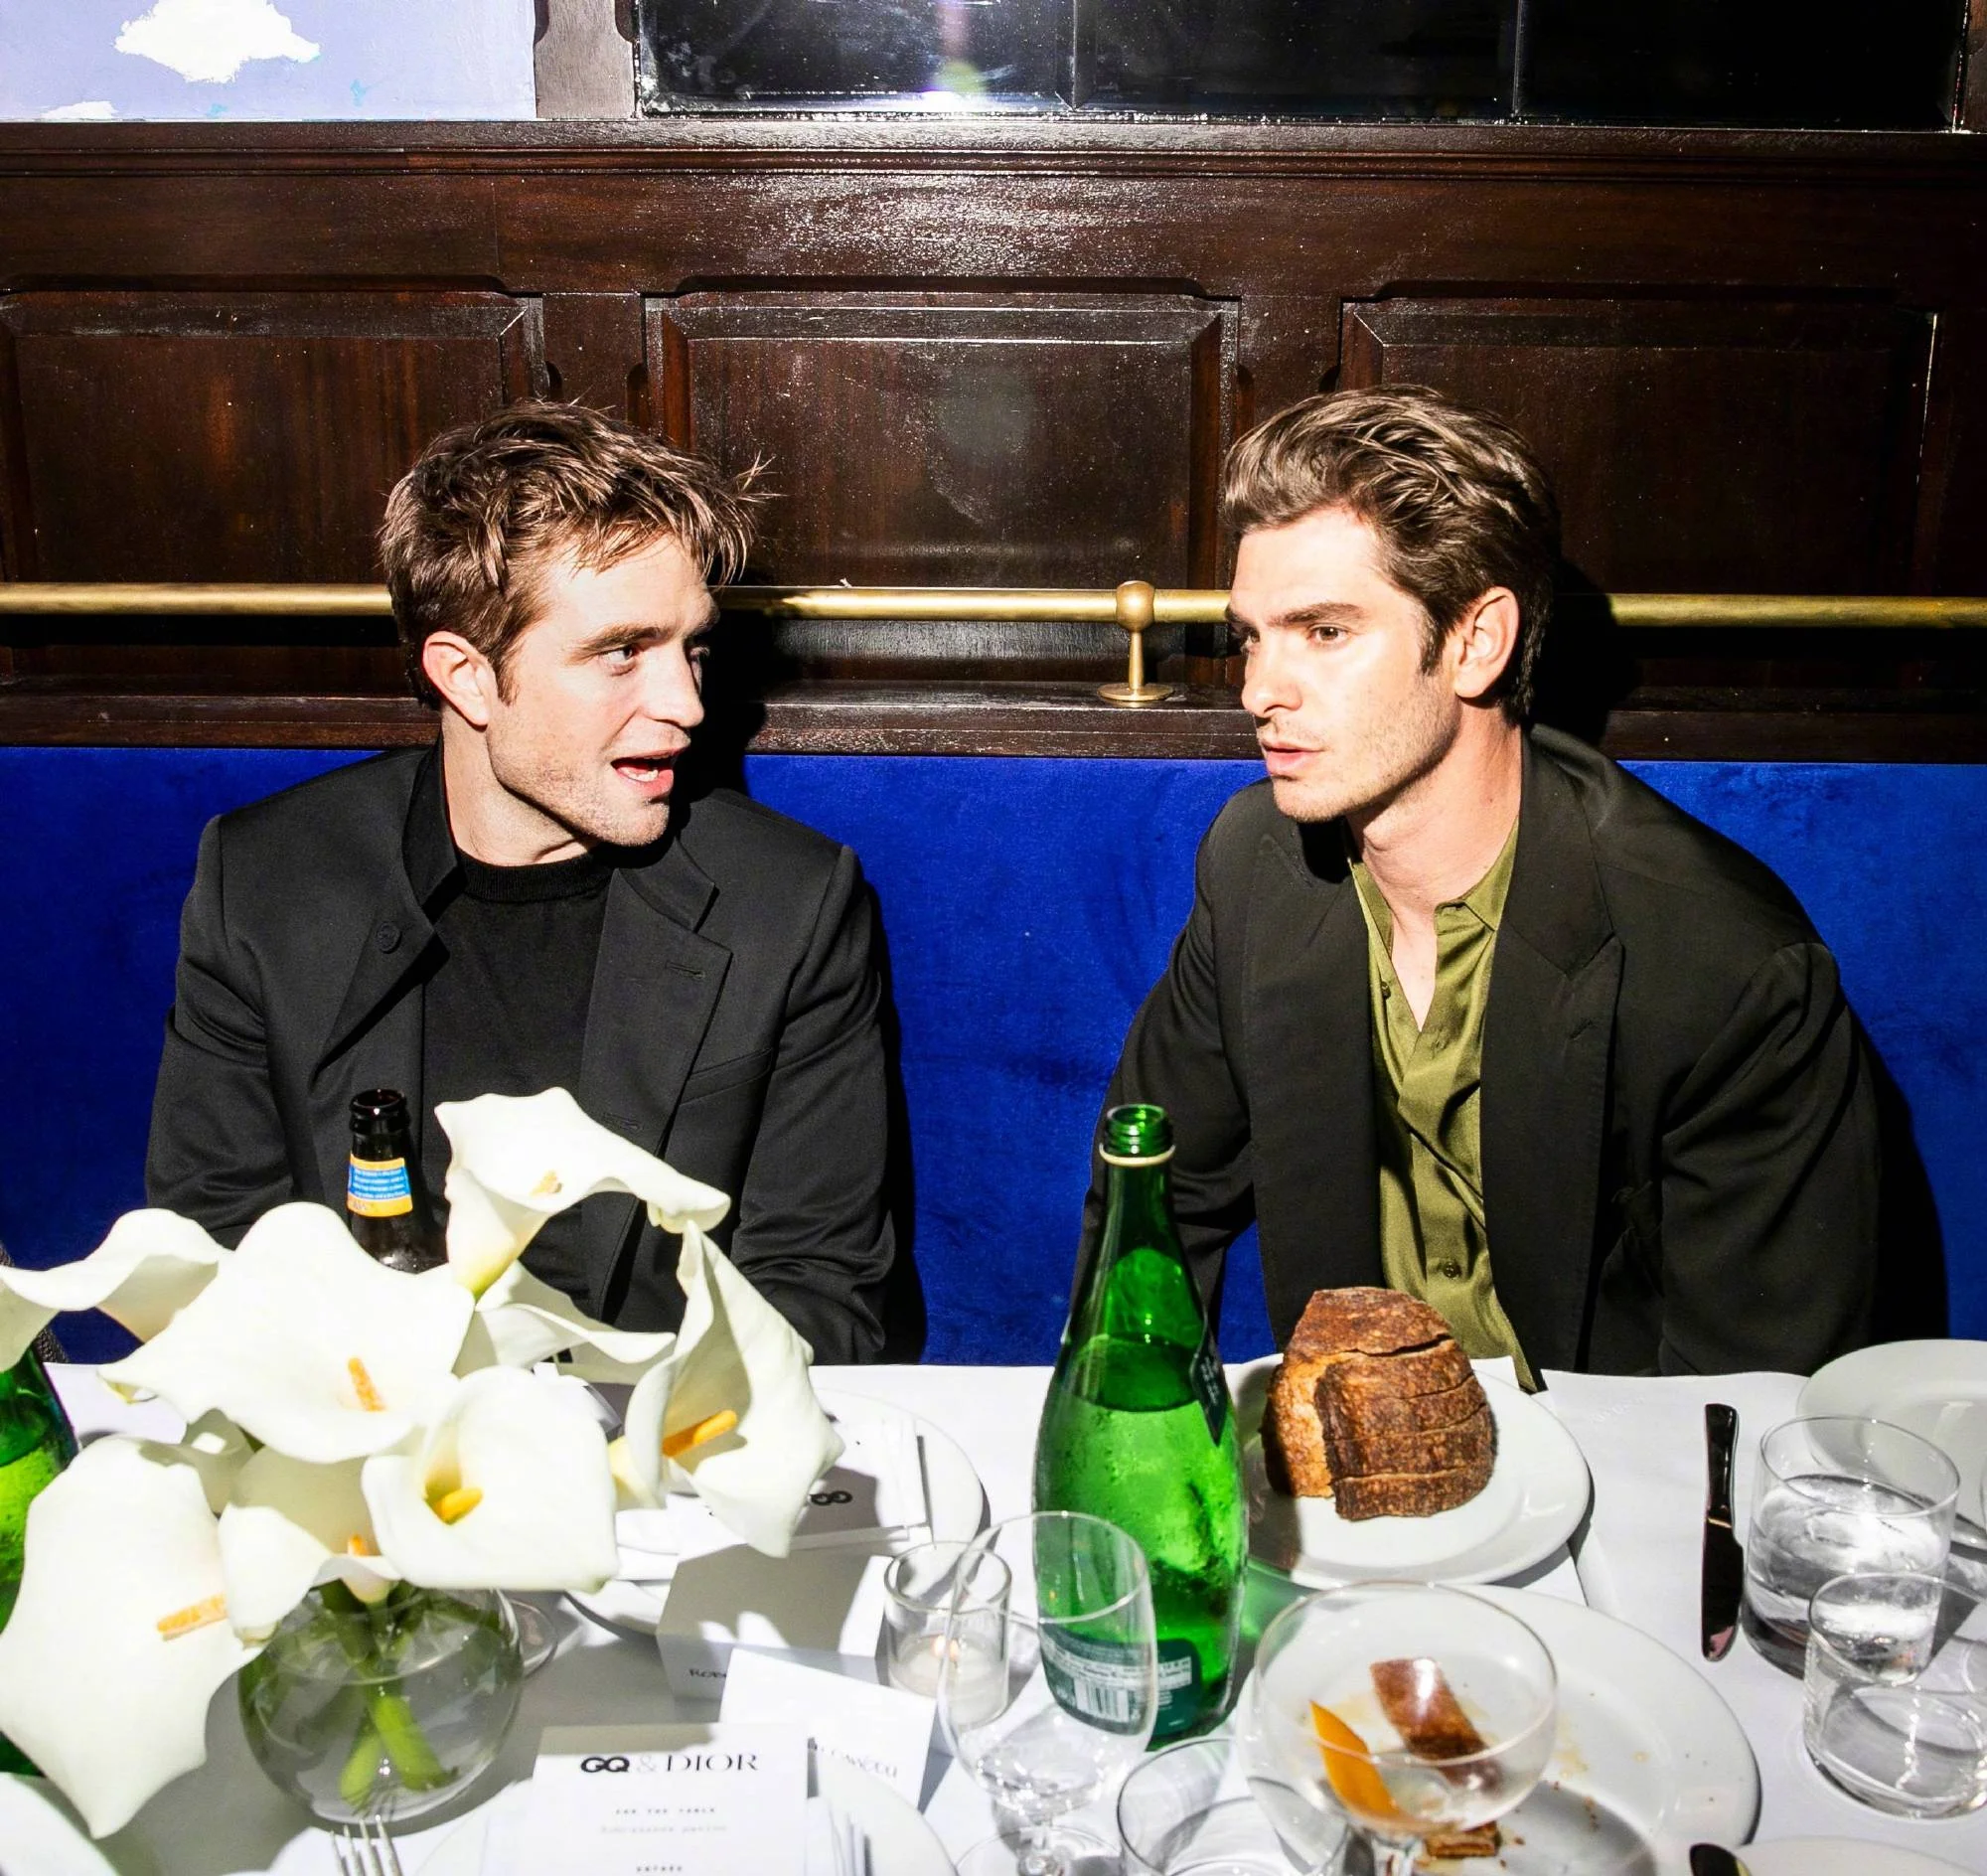 Spiderman and Batman photo together, Andrew Garfield and Robert Pattinson attend fashion dinner ​​​